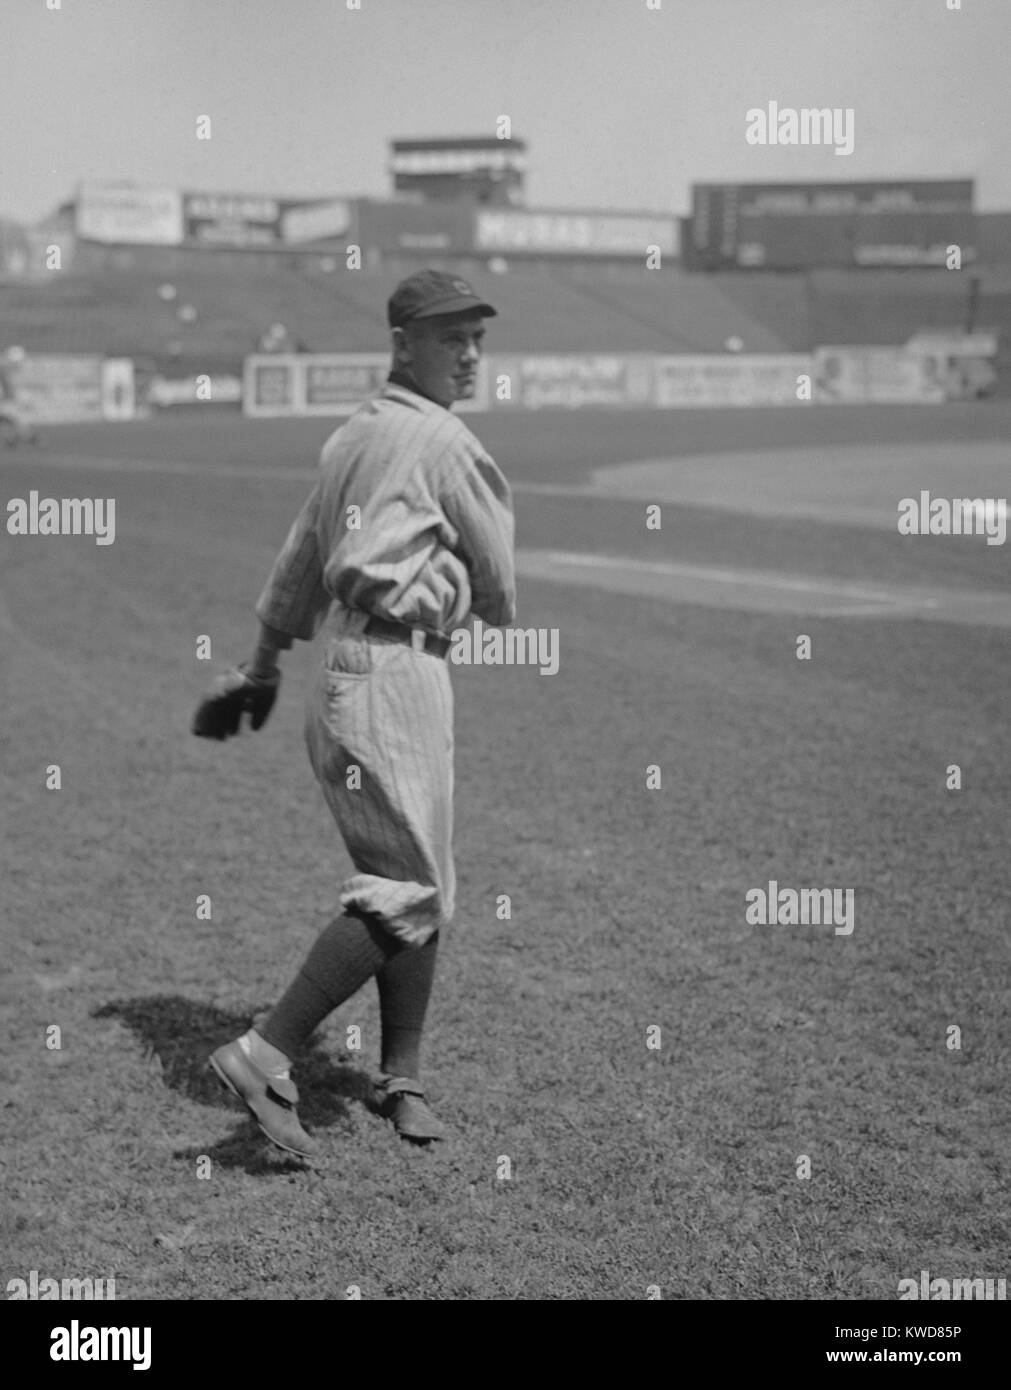 Ray Chapman, of the Cleveland Indians in 1919. On August 17, 1920 he became the first player killed during a major league baseball game after a pitch by Yankees' Carl Mays hit his head. (BSLOC 2015 17 11) Stock Photo